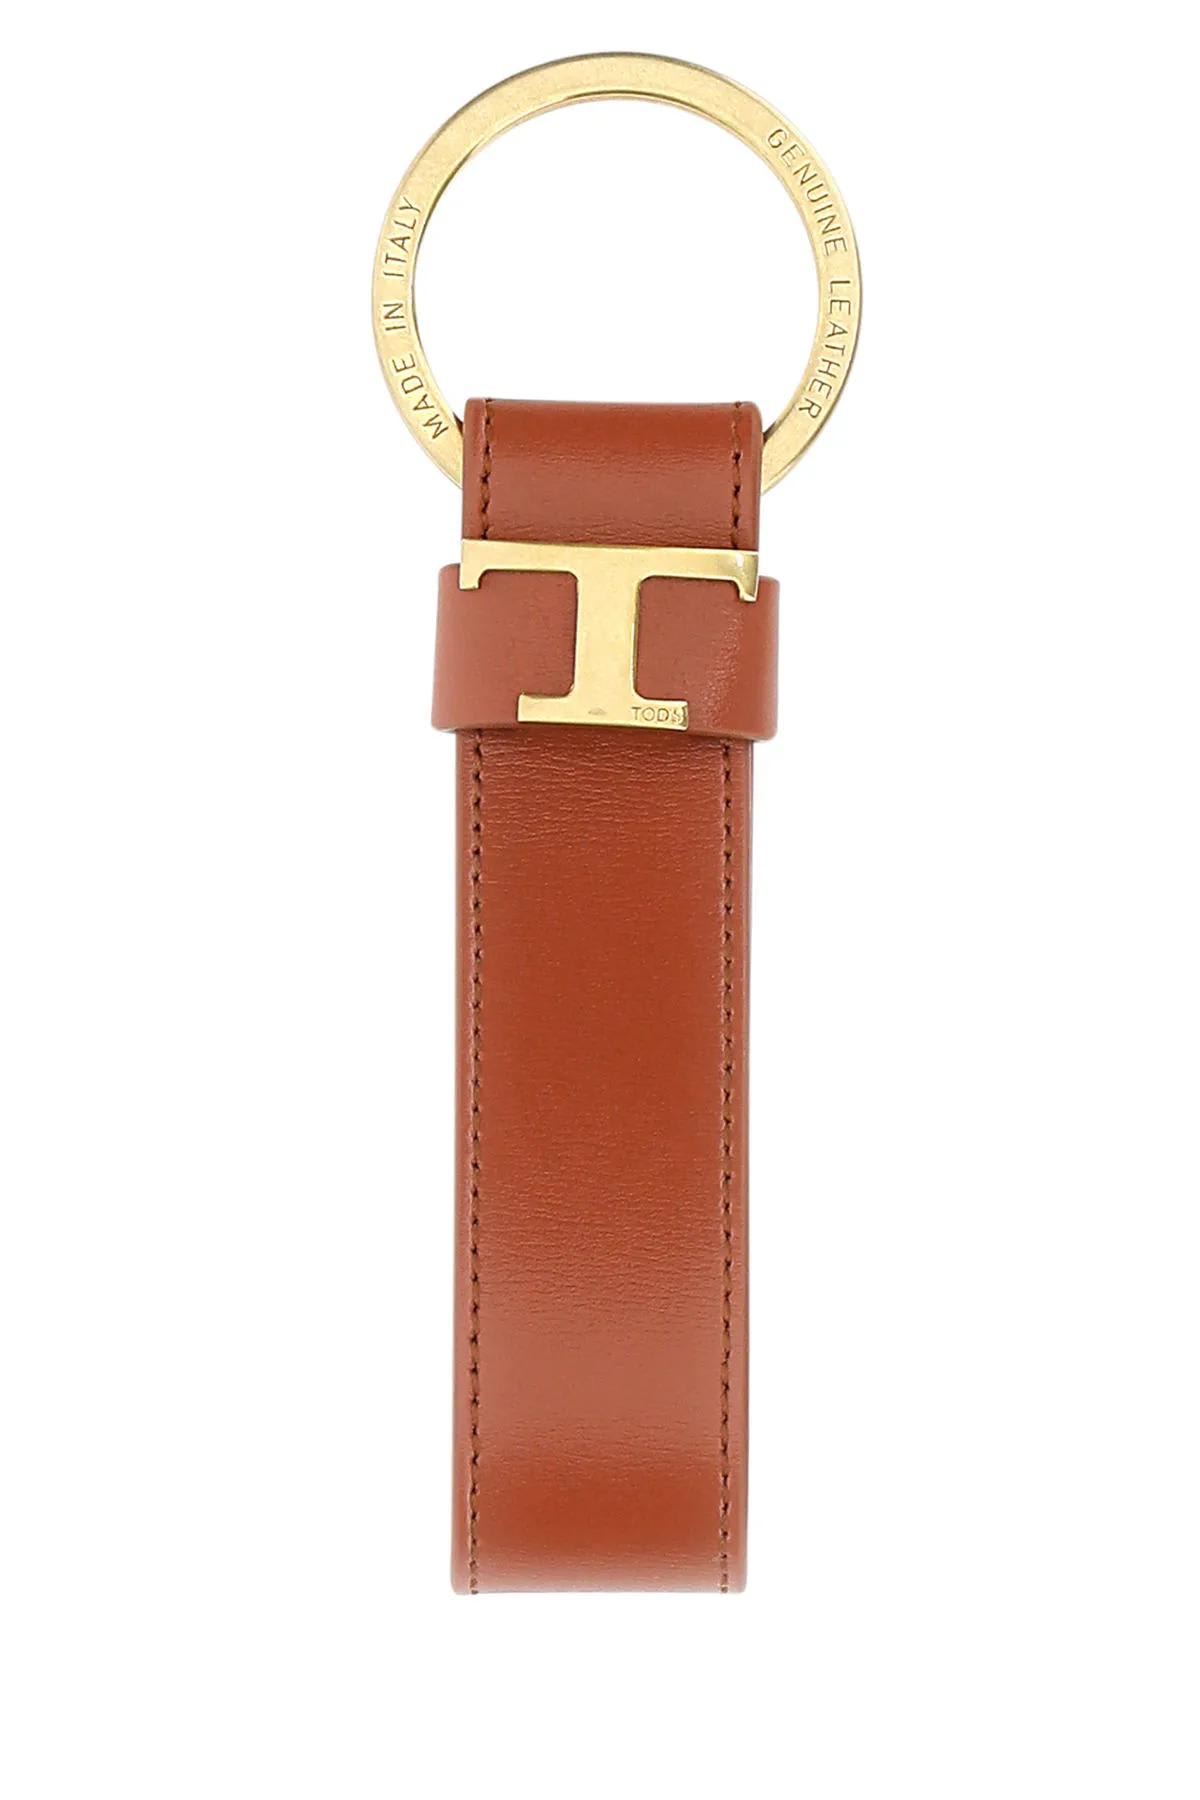 TOD'S BRICK LEATHER KEYRING TODS